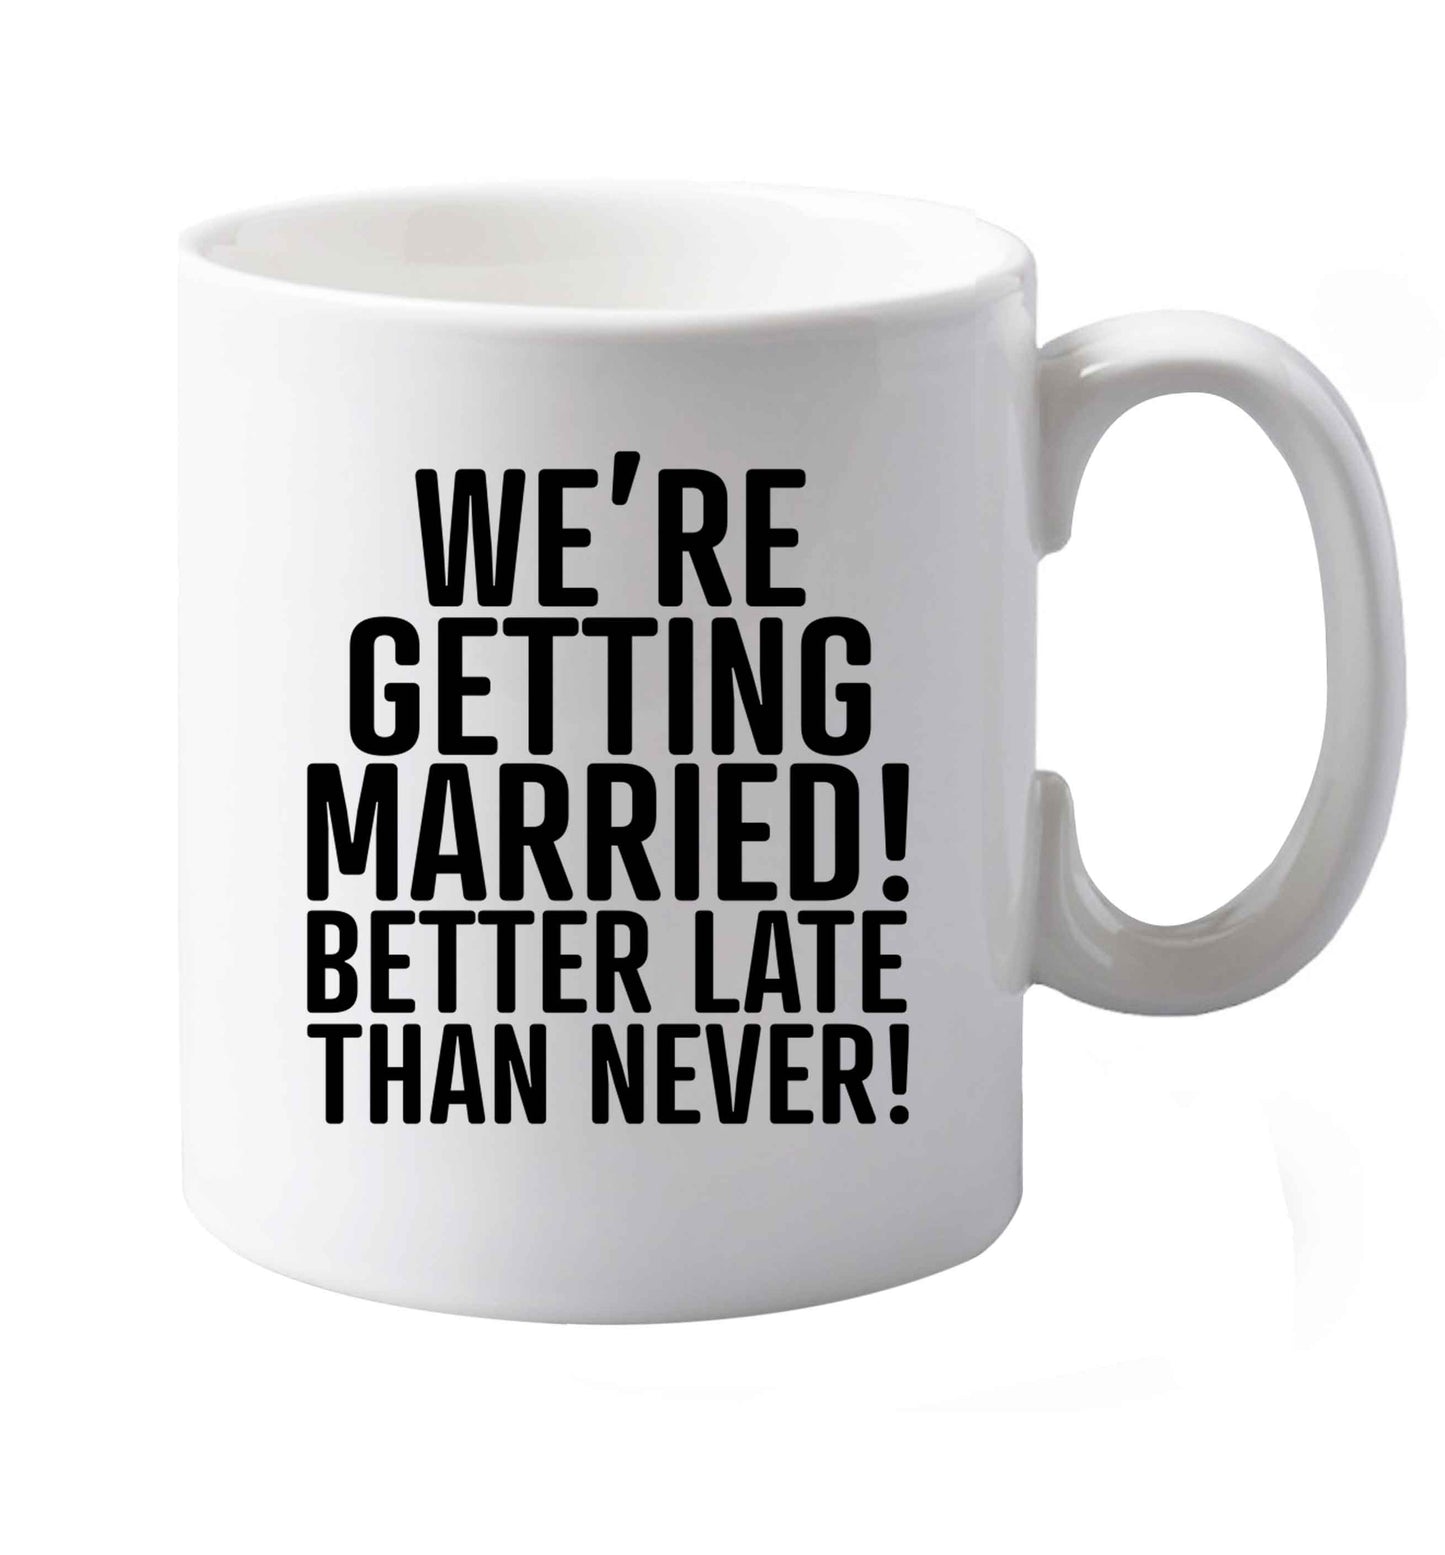 10 oz Always the bridesmaid but never the bride? Until now!   ceramic mug both sides